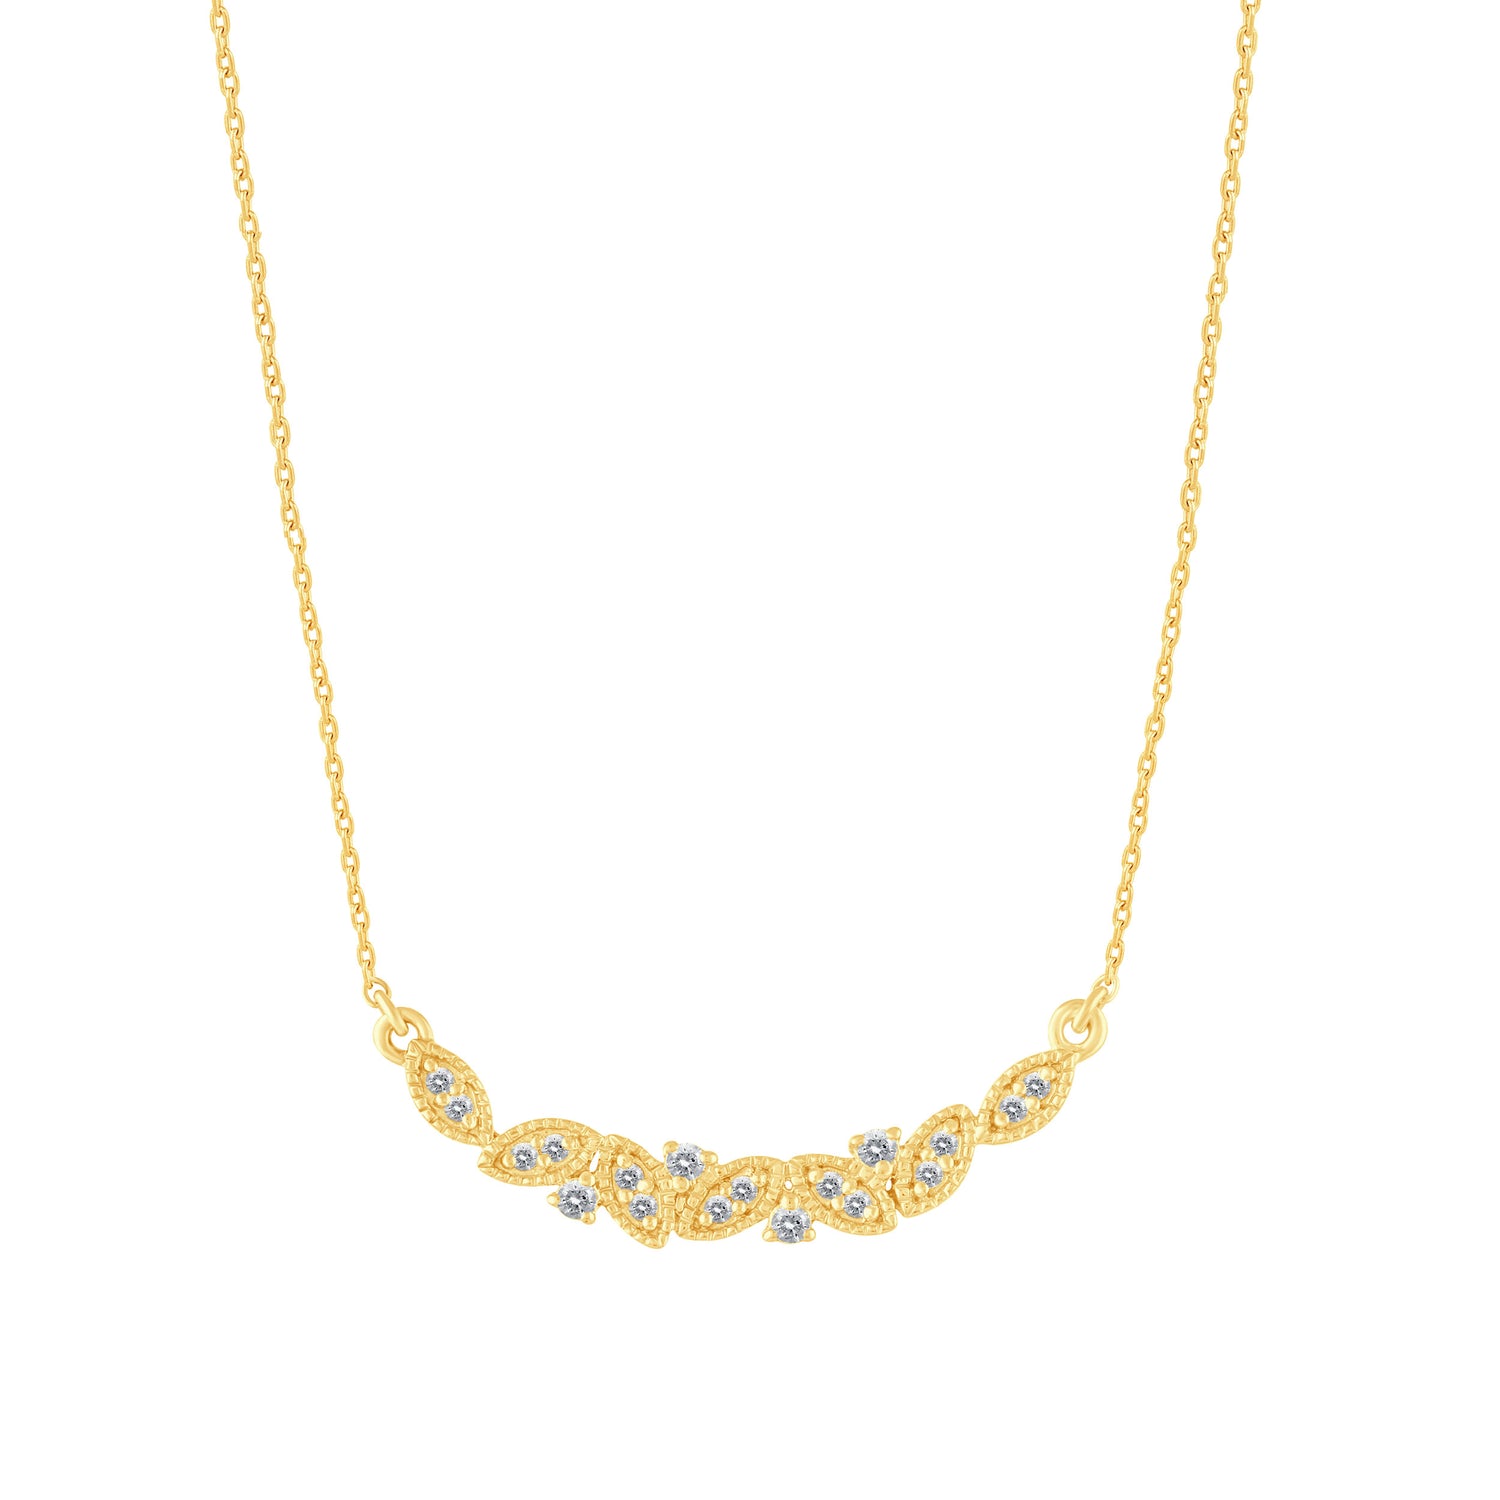 1/5 Cttw Diamond Mosaic Crescent Moon Smile Bar Pendant Necklace set in 925 Sterling Silver 14K Yellow Gold Plating